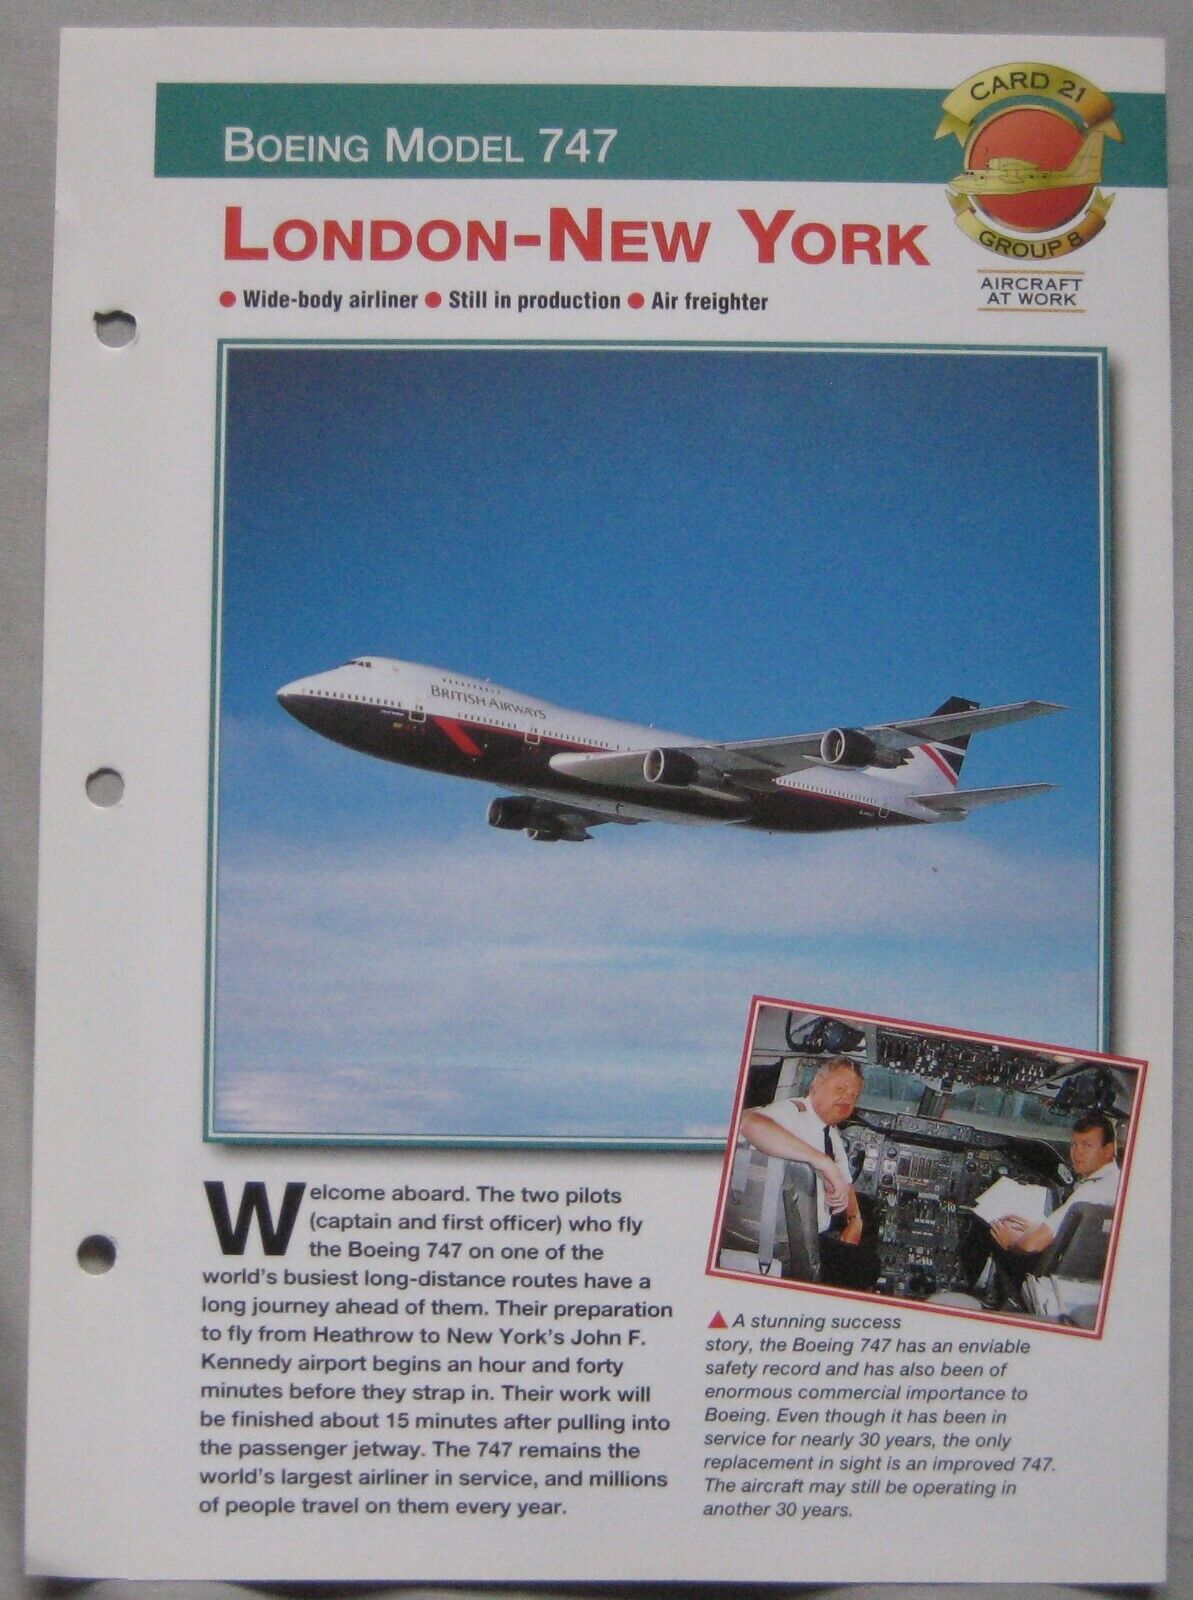 Aircraft of the World Card 21 , Group 8 - Boeing 747 London-New York